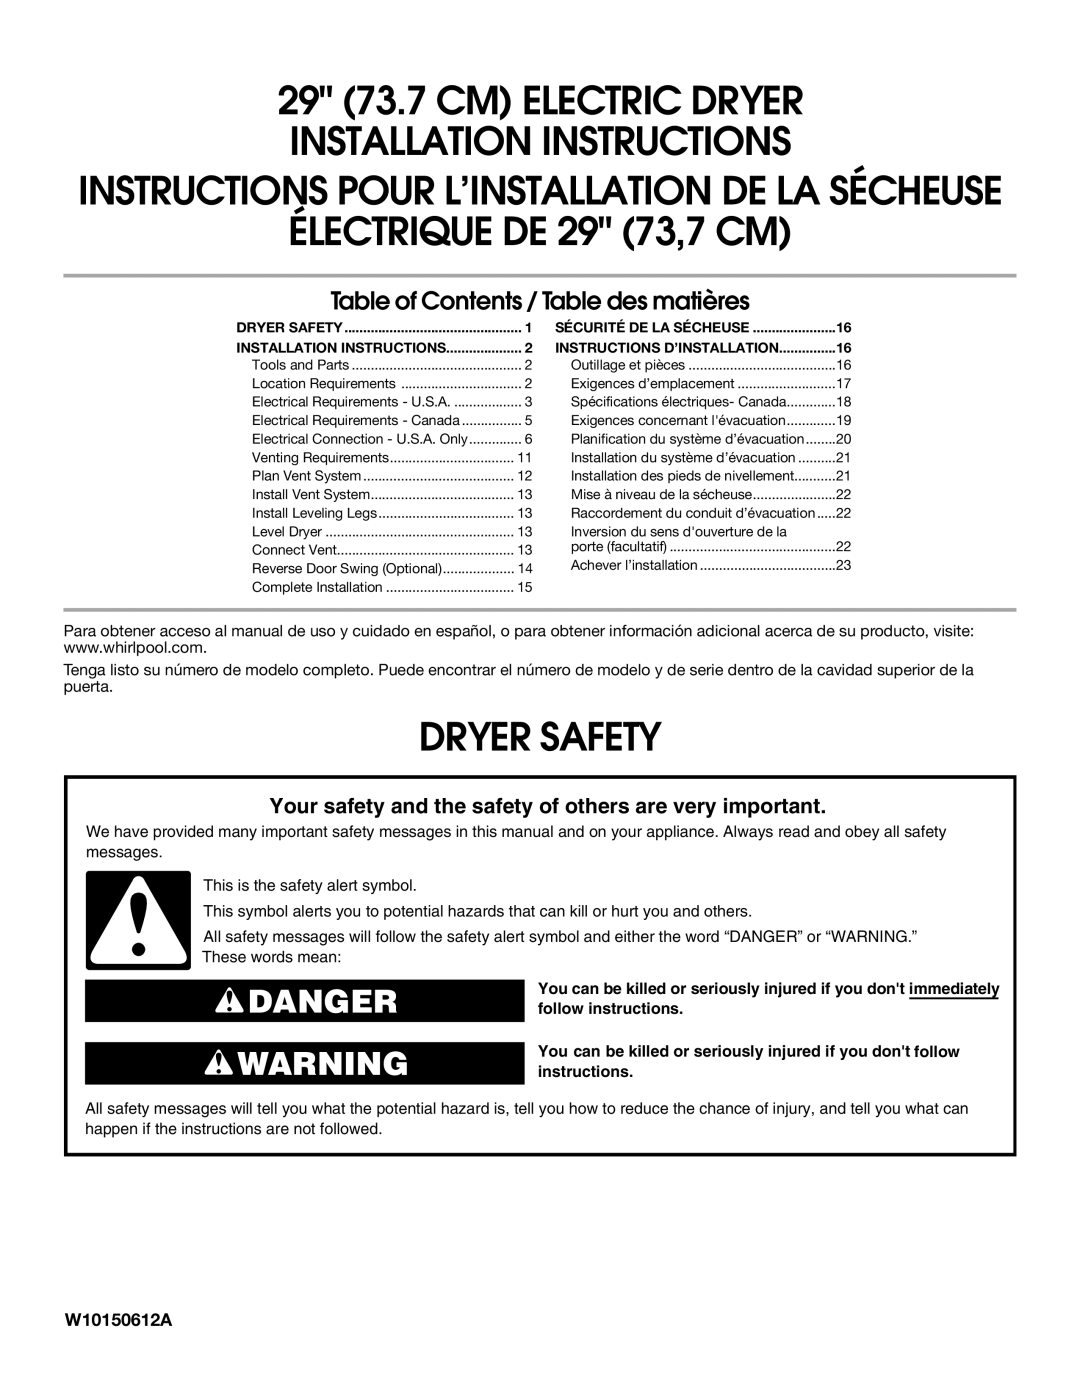 Amana W10150612A installation instructions 29 73.7 CM Electric Dryer Installation Instructions 